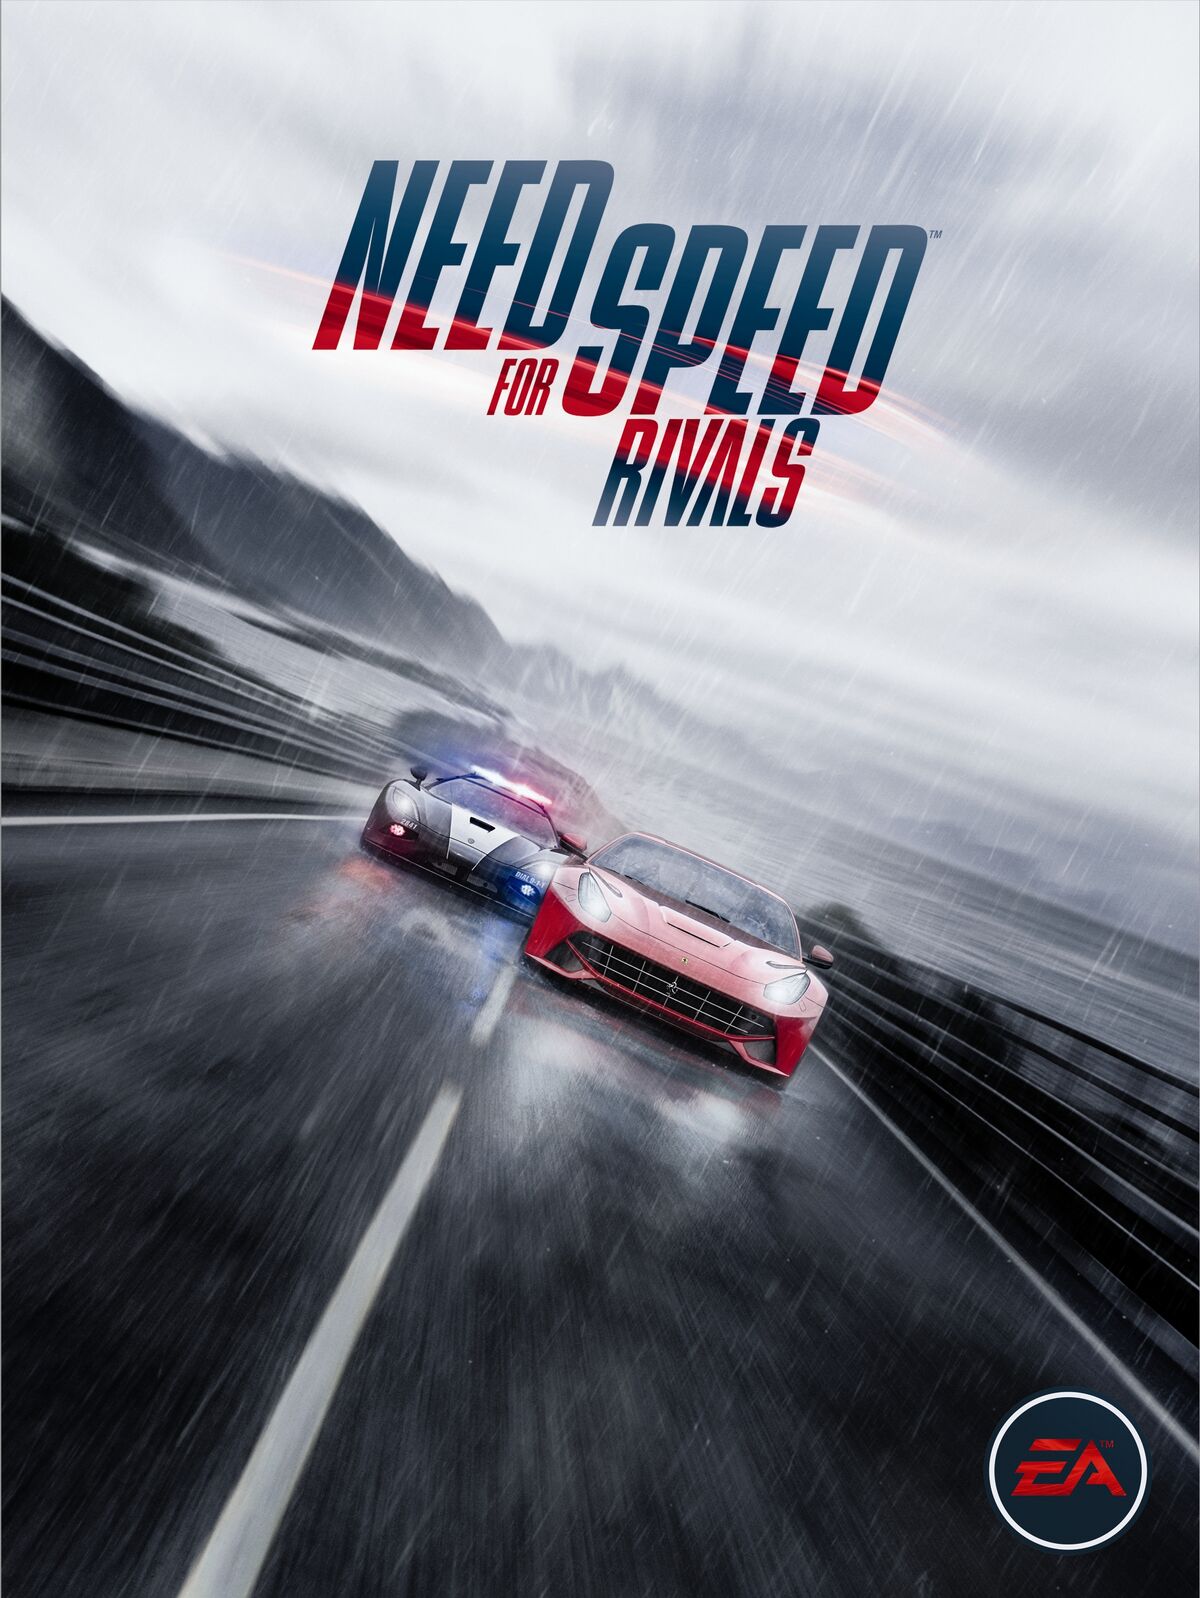 The Complete List of Need For Speed Games in Chronological